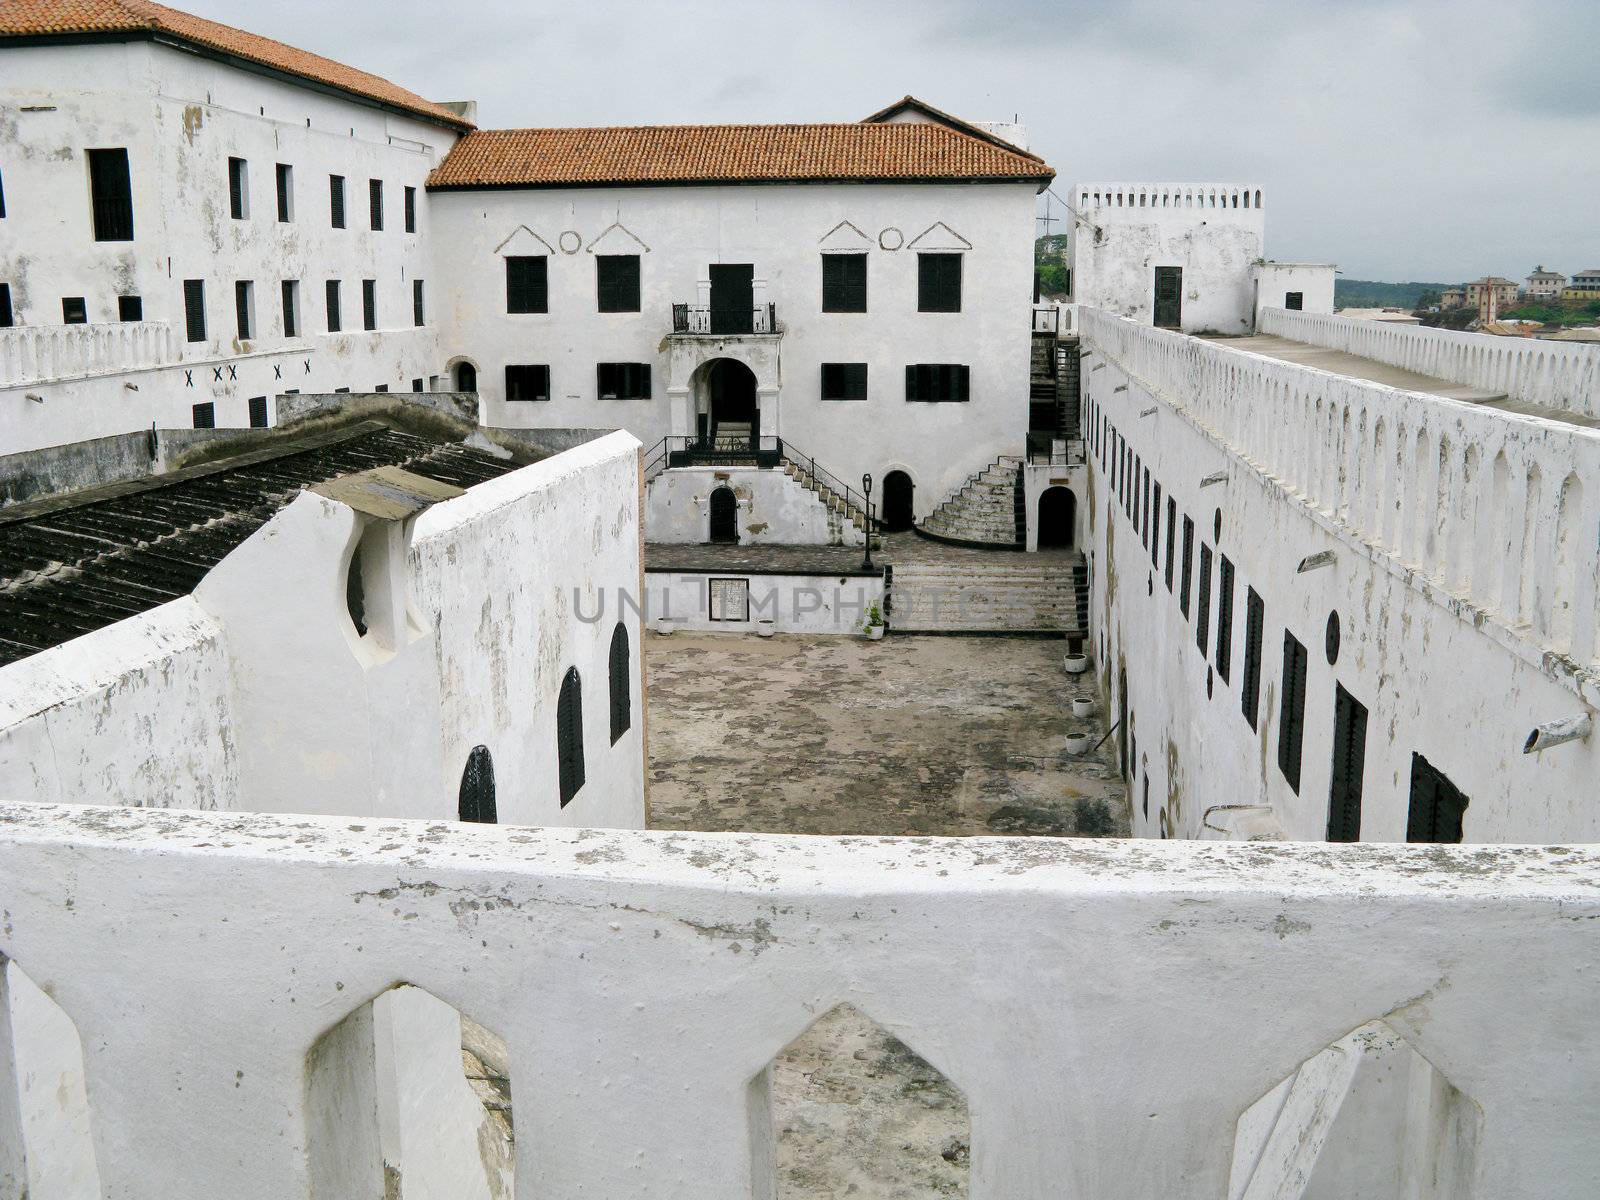 Interior of Elmina Castle in Ghana, a former slave transit point from Africa to America